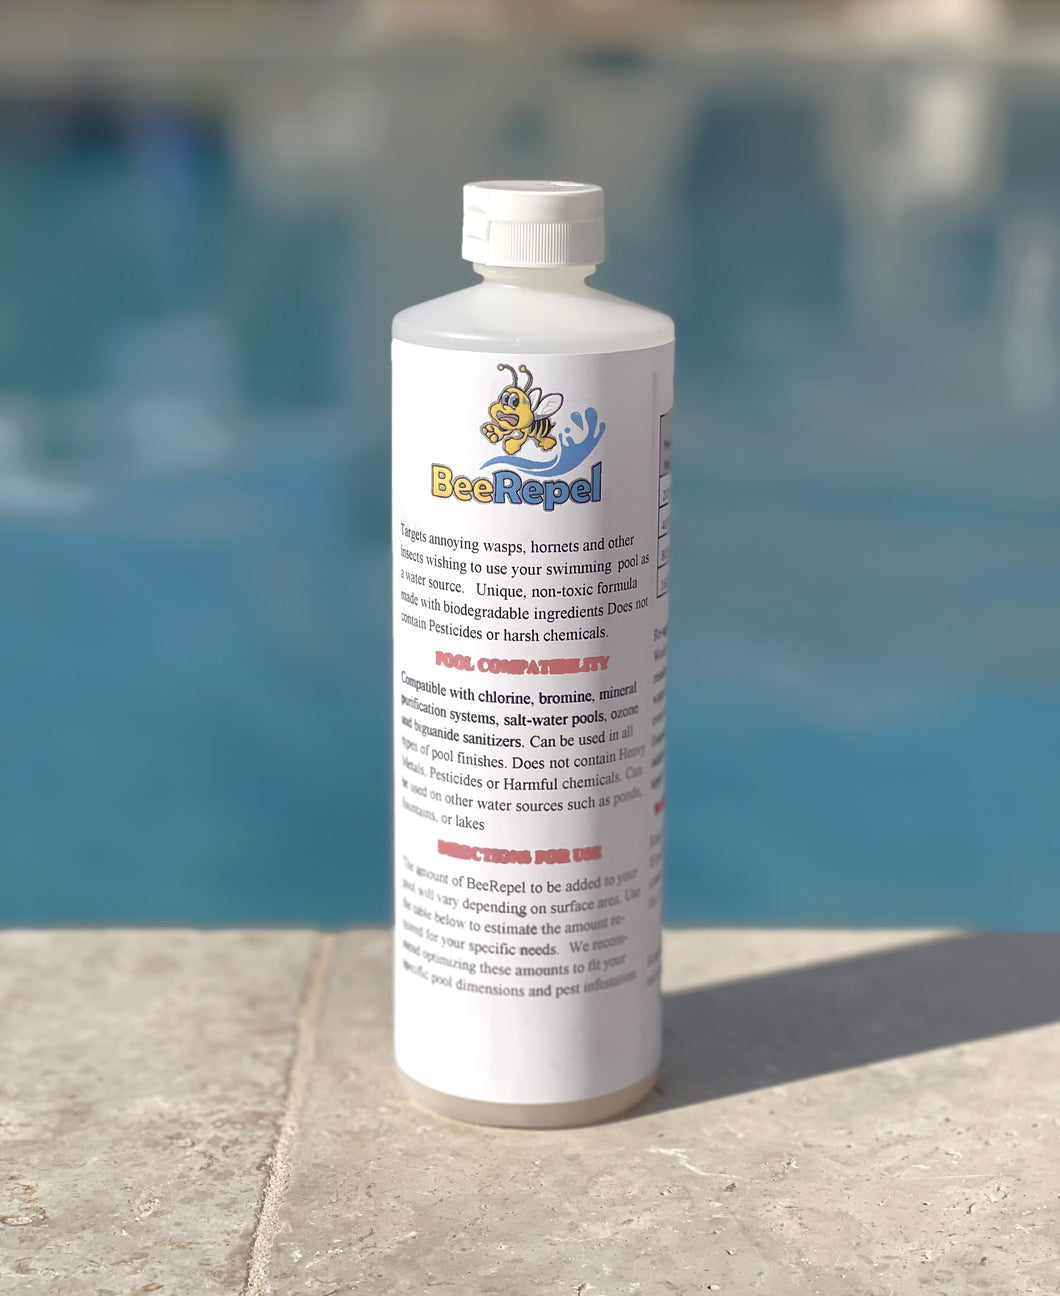 BeeRepel - Keeps Bees and Wasps away from Pool